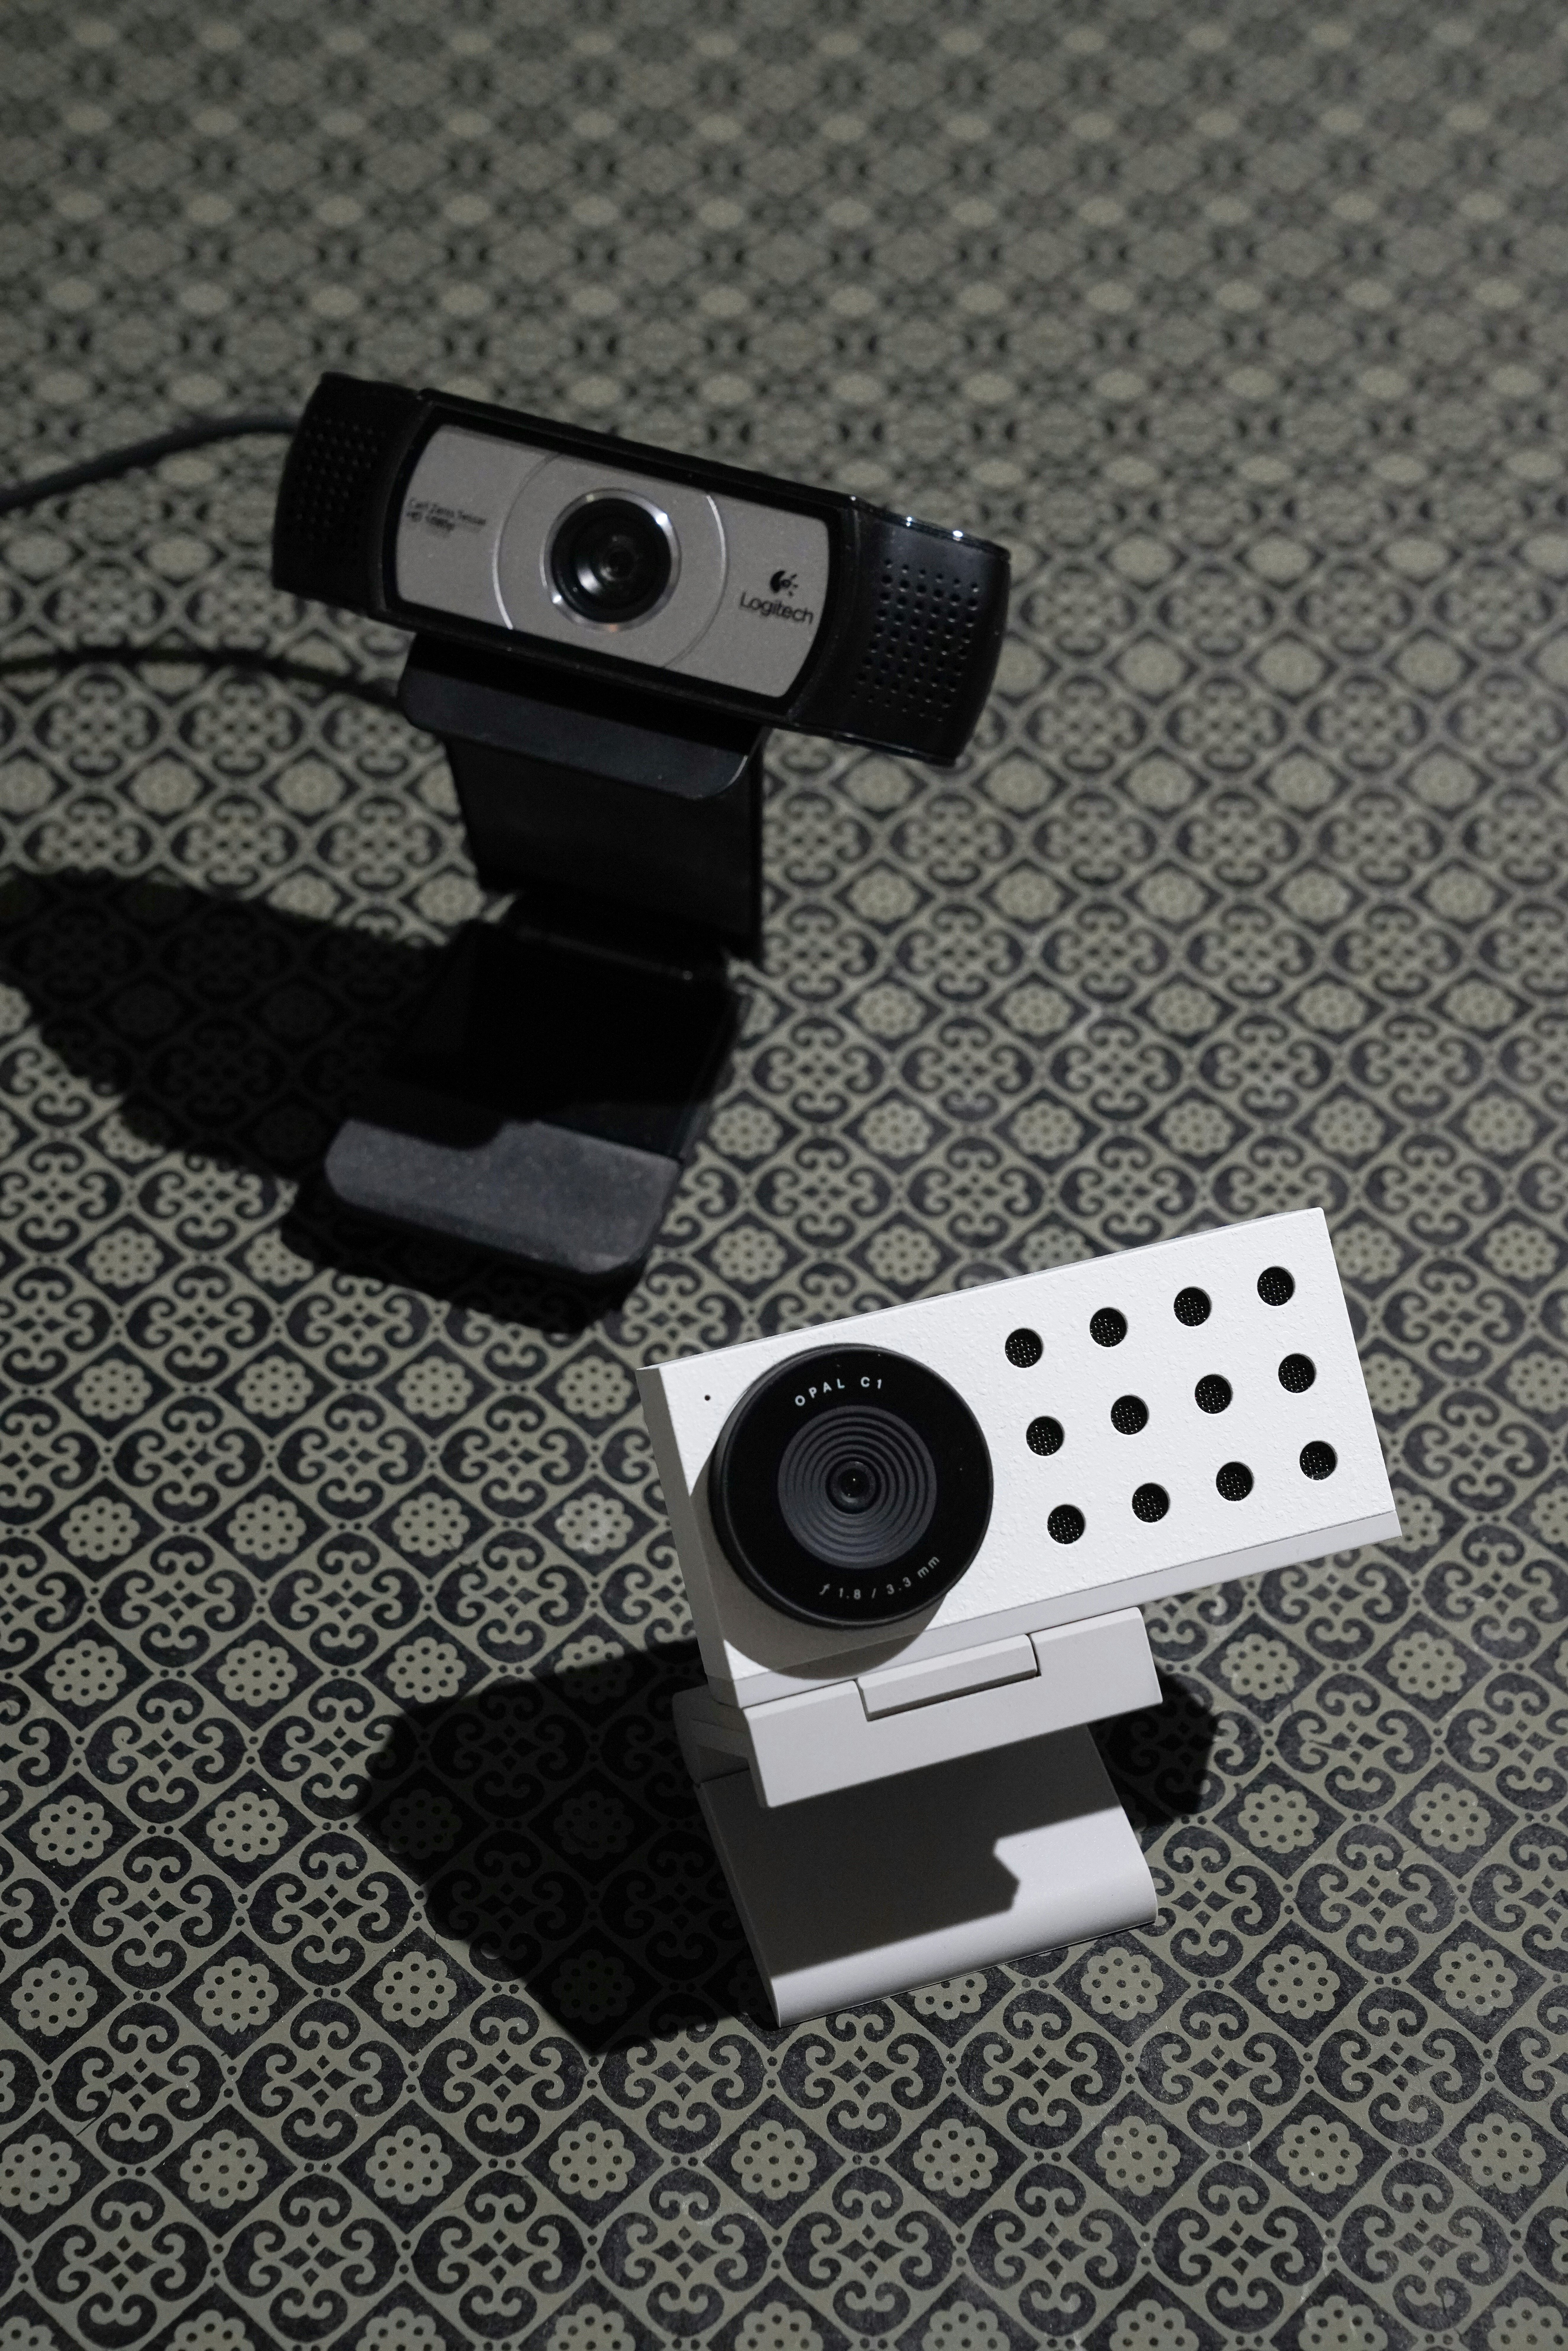 The Opal C1 is the revolution webcams need